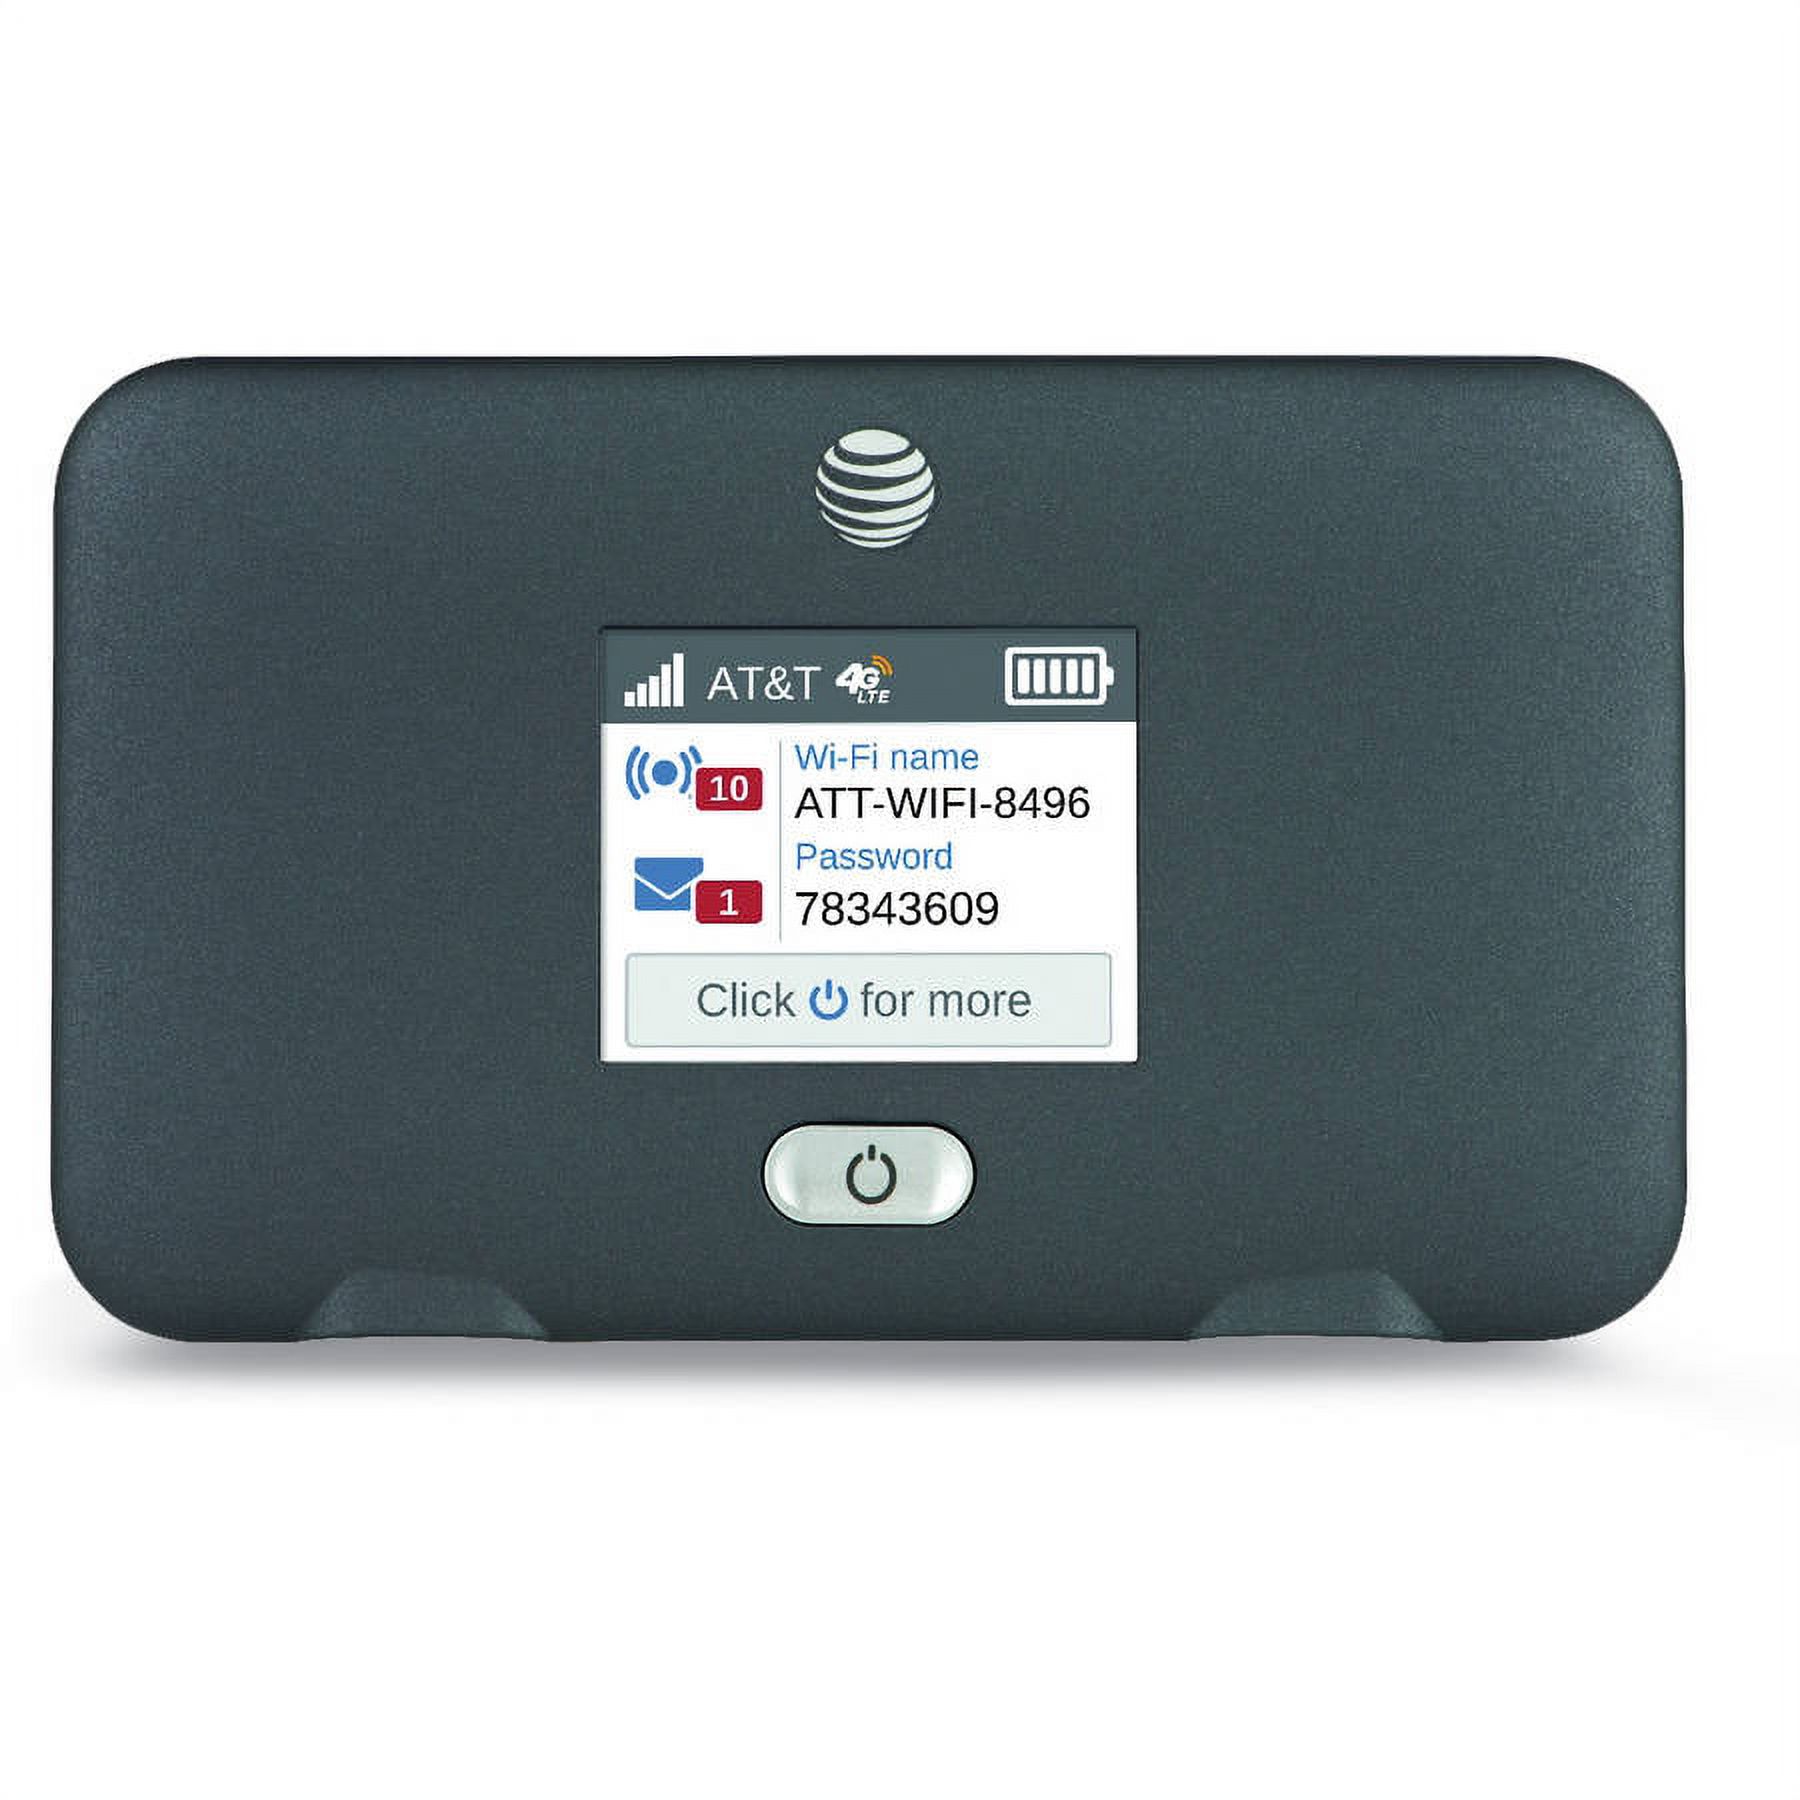 AT&T AirCard 779S 4G LTE No-Contract Mobile Hotspot - Black - image 1 of 2